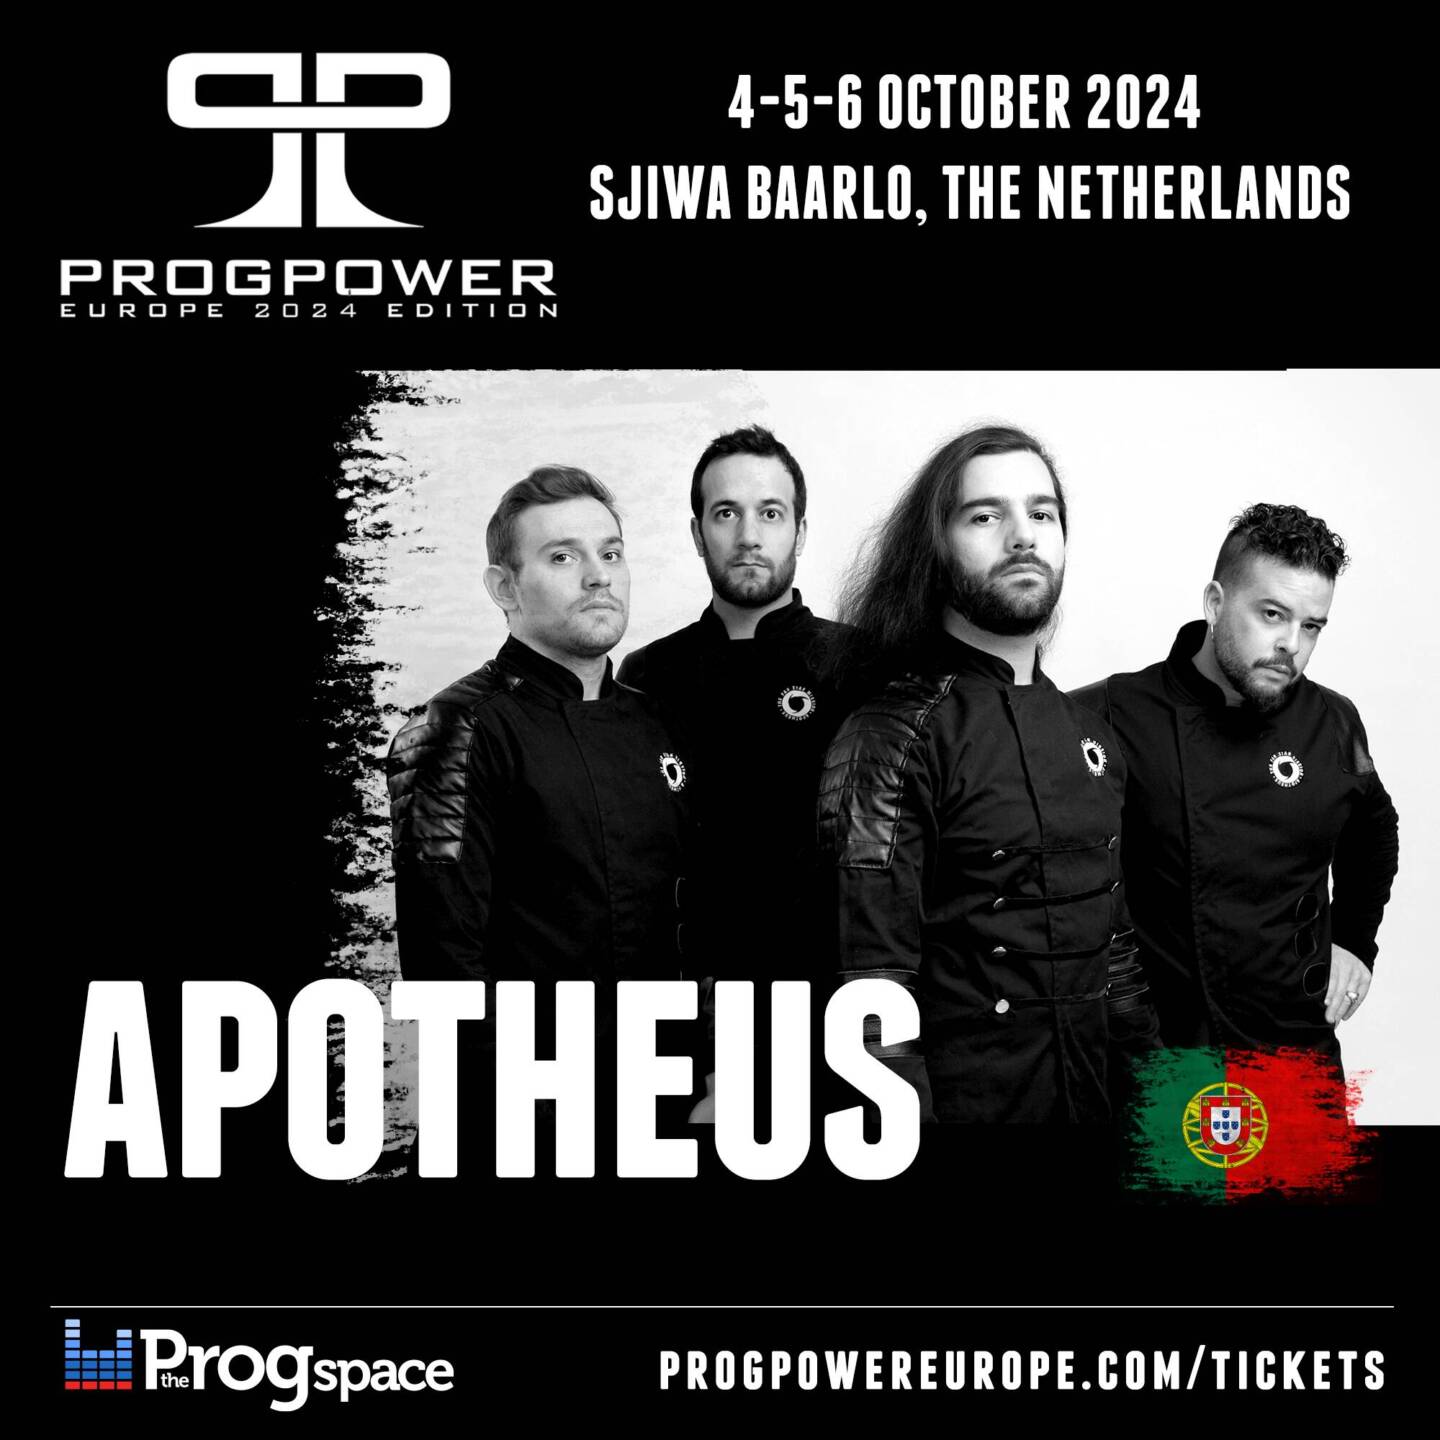 Apotheus from Portugal is the next band to play ProgPower Europe 2024!